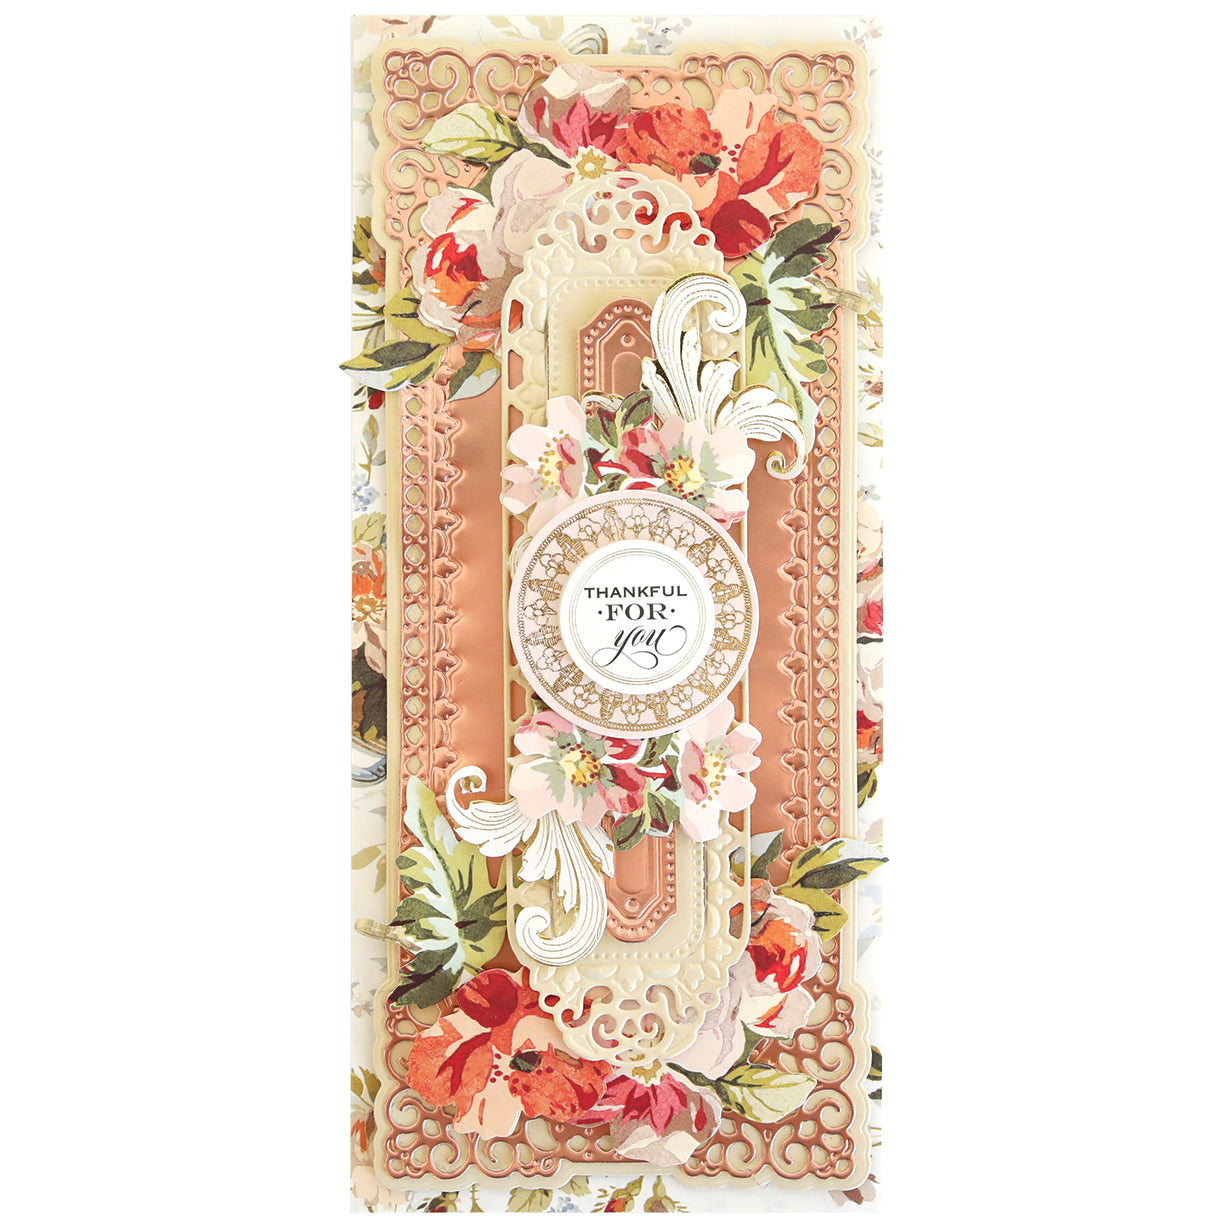 A card with a floral design on it, featuring 3D Oblong Slimline Concentric Frame Dies with intricate cutting and multi-level embossing.